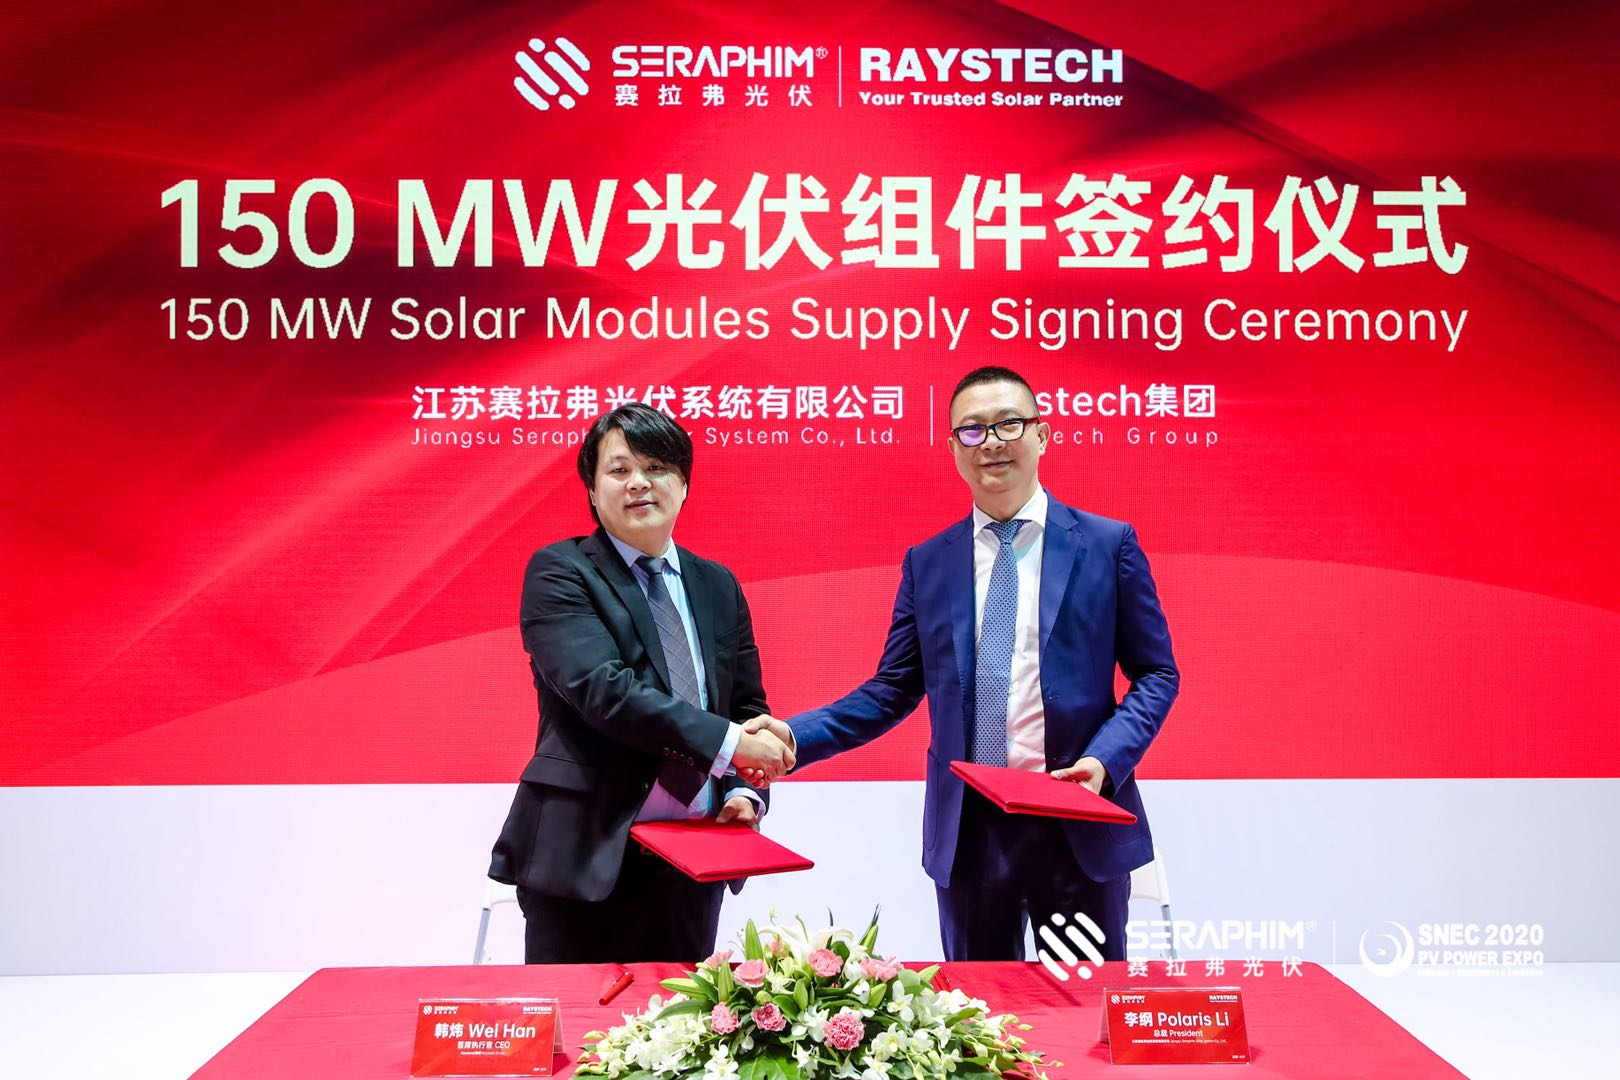 Photo Seraphim signed a 150 MW photovoltaic modules supply agreement with Raystech Group at the SNEC PV POWER EXPO 2020 in Shanghai..jpg